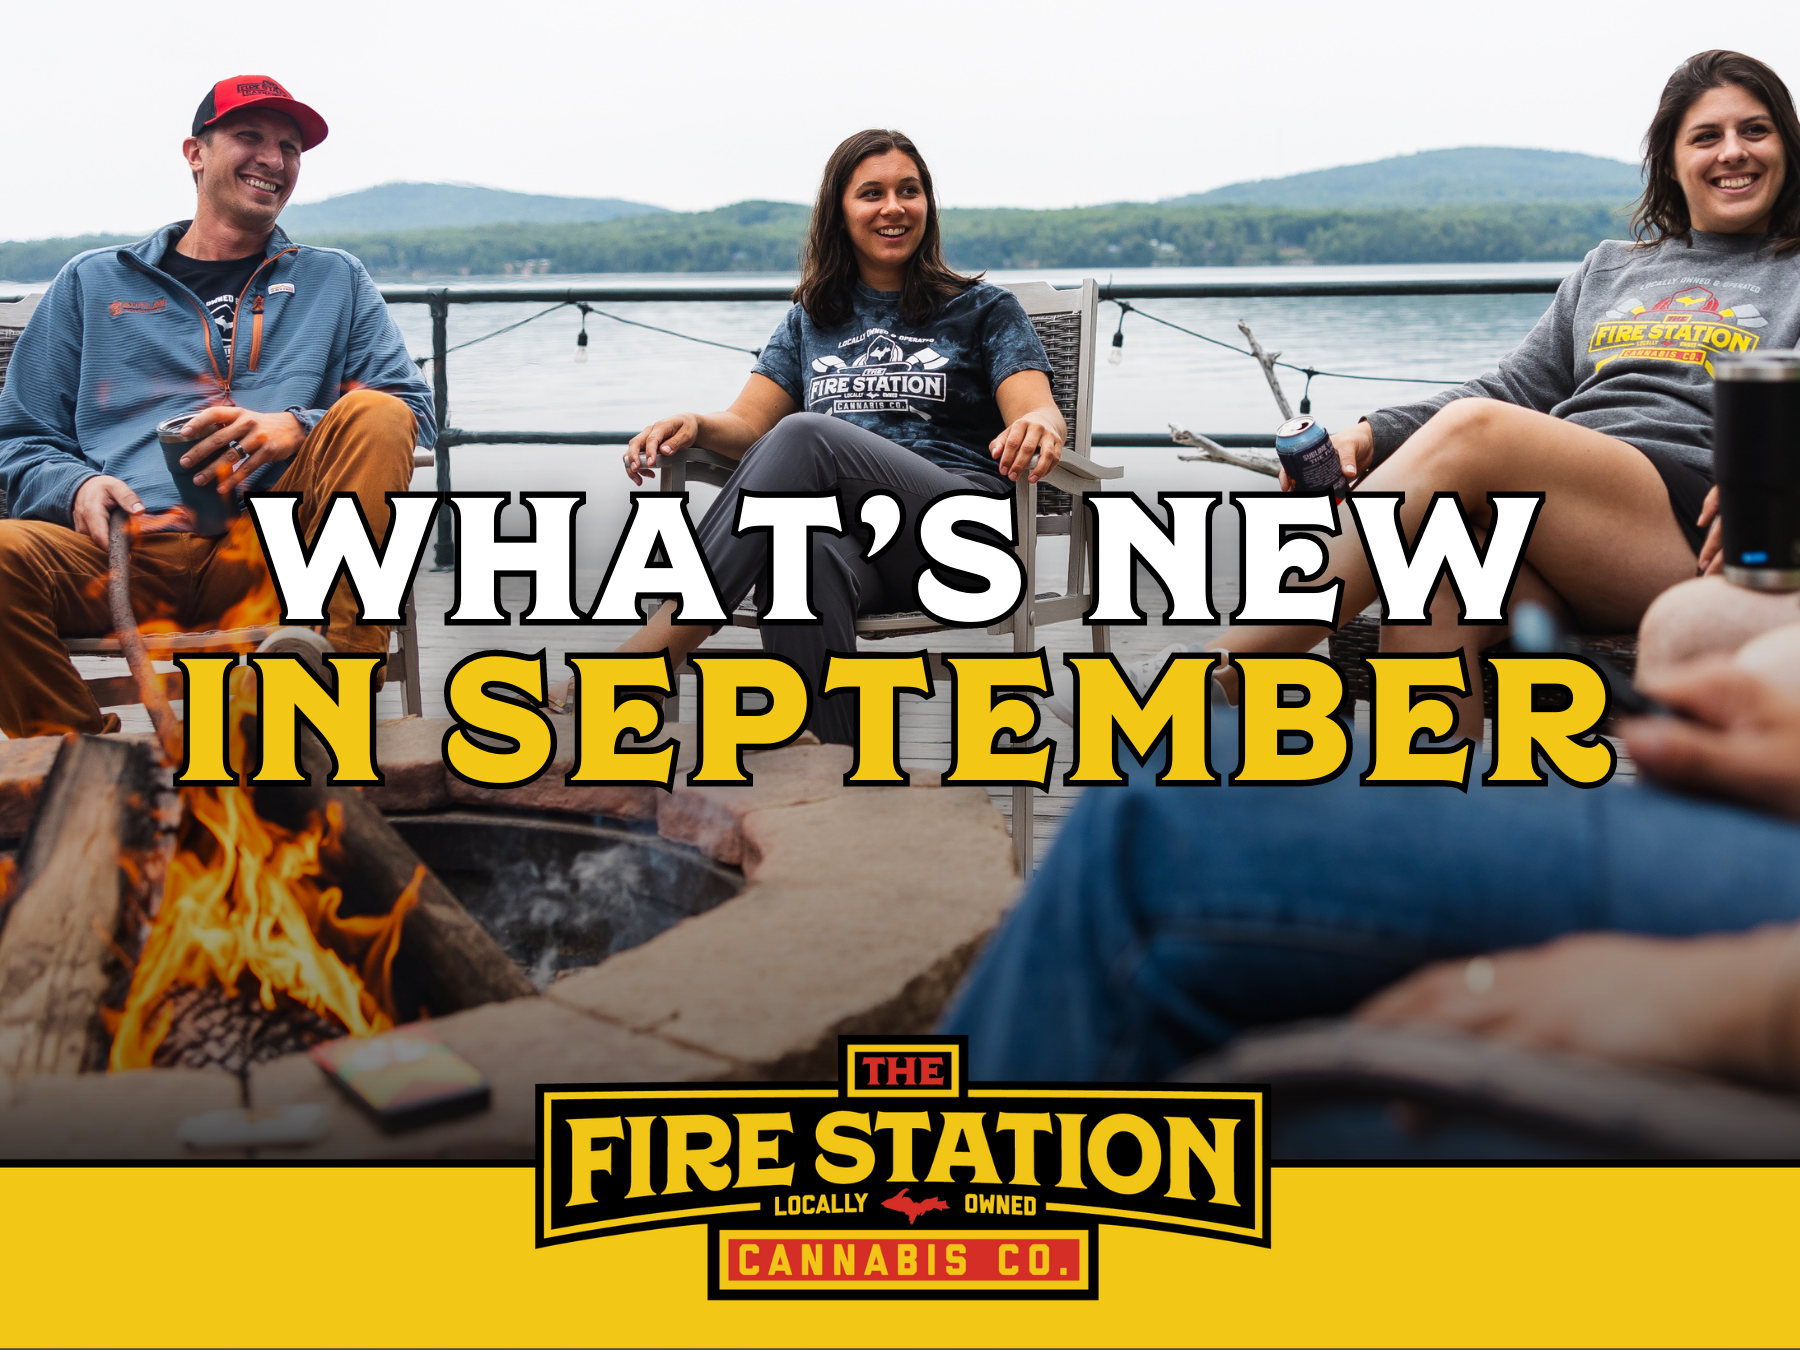 What's new at The Fire Station Cannabis Company in September